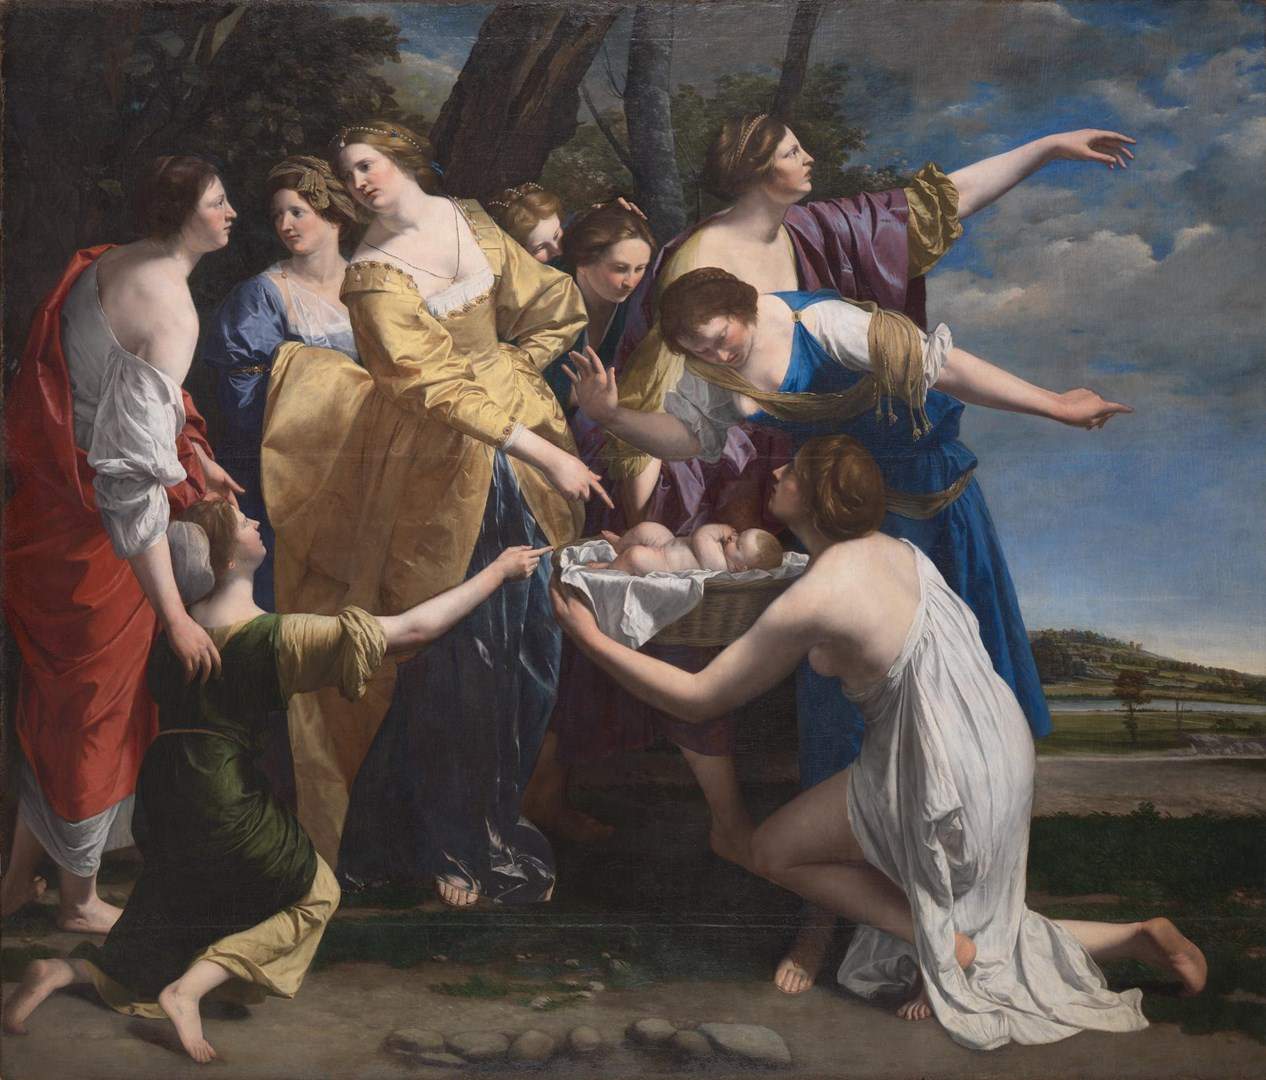 The National Gallery in London acquires a masterpiece by Orazio Gentileschi, the Finding of Moses